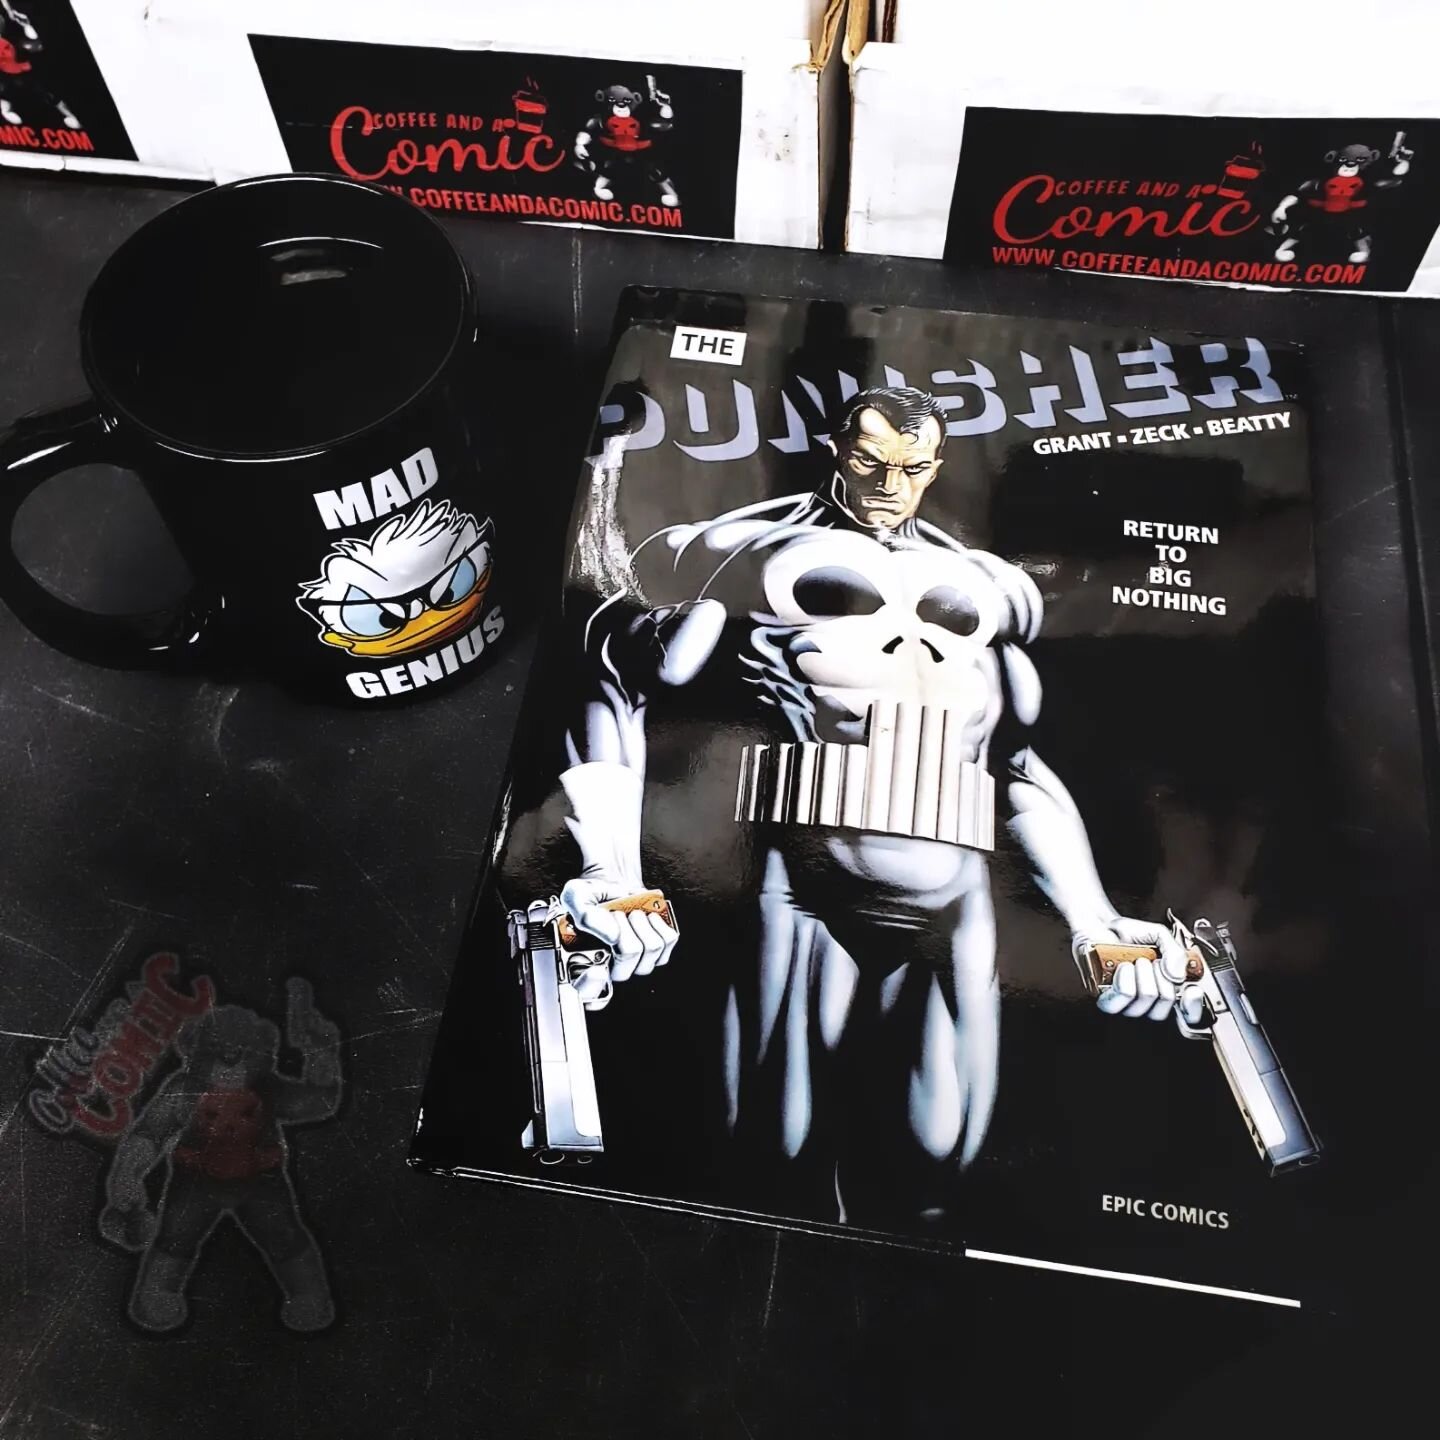 Today's coffee ☕ and a comic 📓 has been inspired by @back2back_issues 
The Punisher Return to big nothing 
In the mean streets of Vietnam, Frank Castle earned his stripes in blood. Now, decades later, an old sergeant drags him back to that nightmare